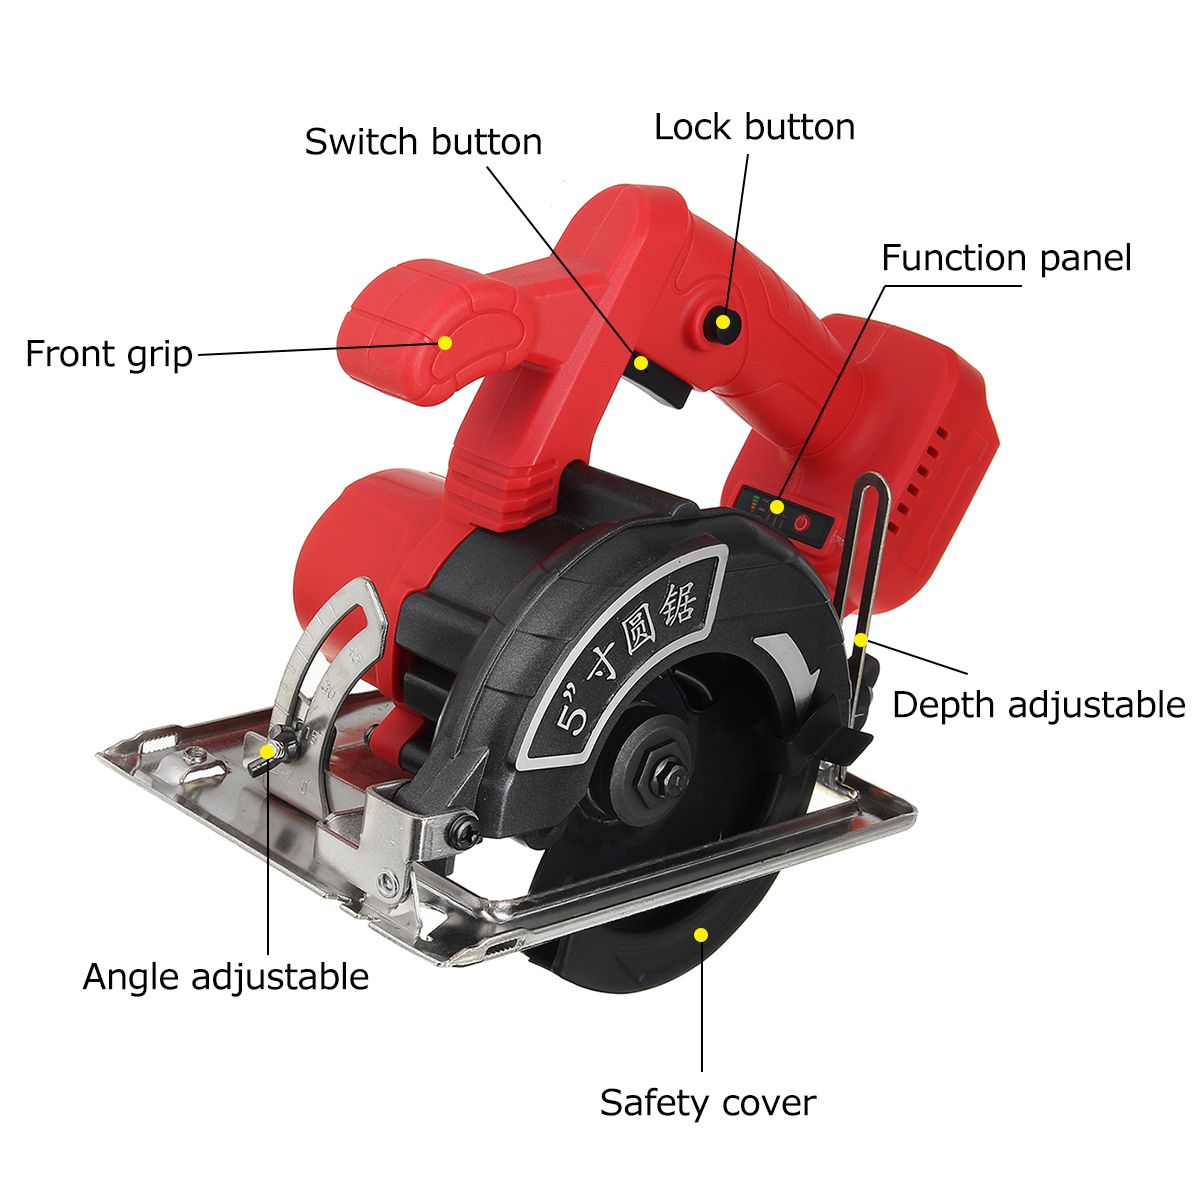 125mm-10800RPM-Multifunction-Circular-Saw-Scale-Bevel-Cutting-Power-Tools-For-18V-Makita-Battery-1759378